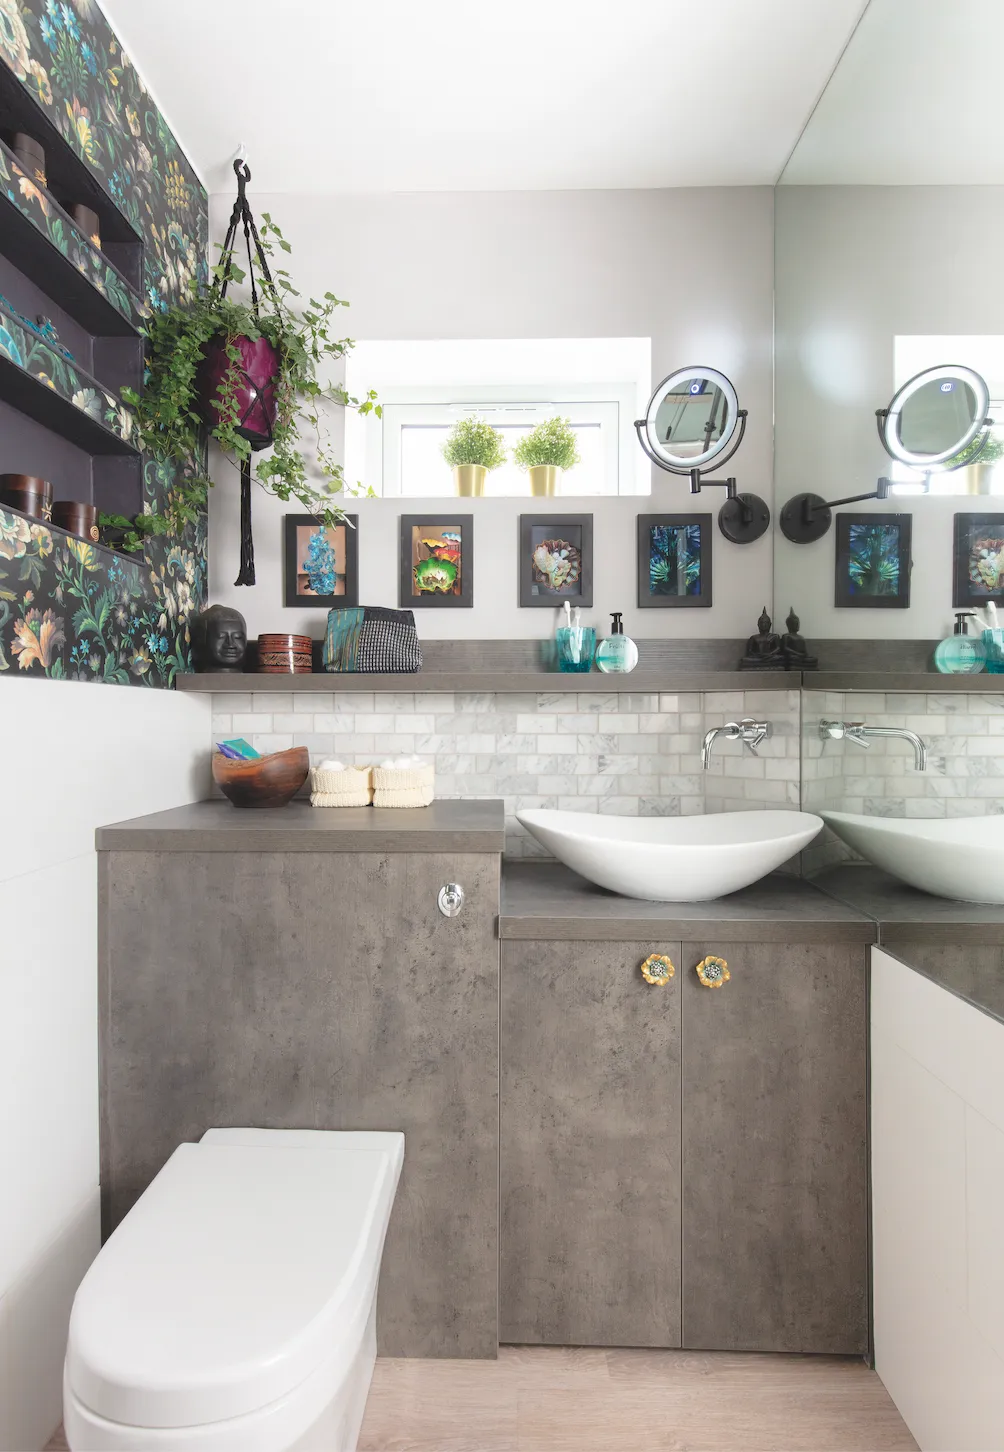 Bathroom makeover: 'It feels like showering in a rainforest!'